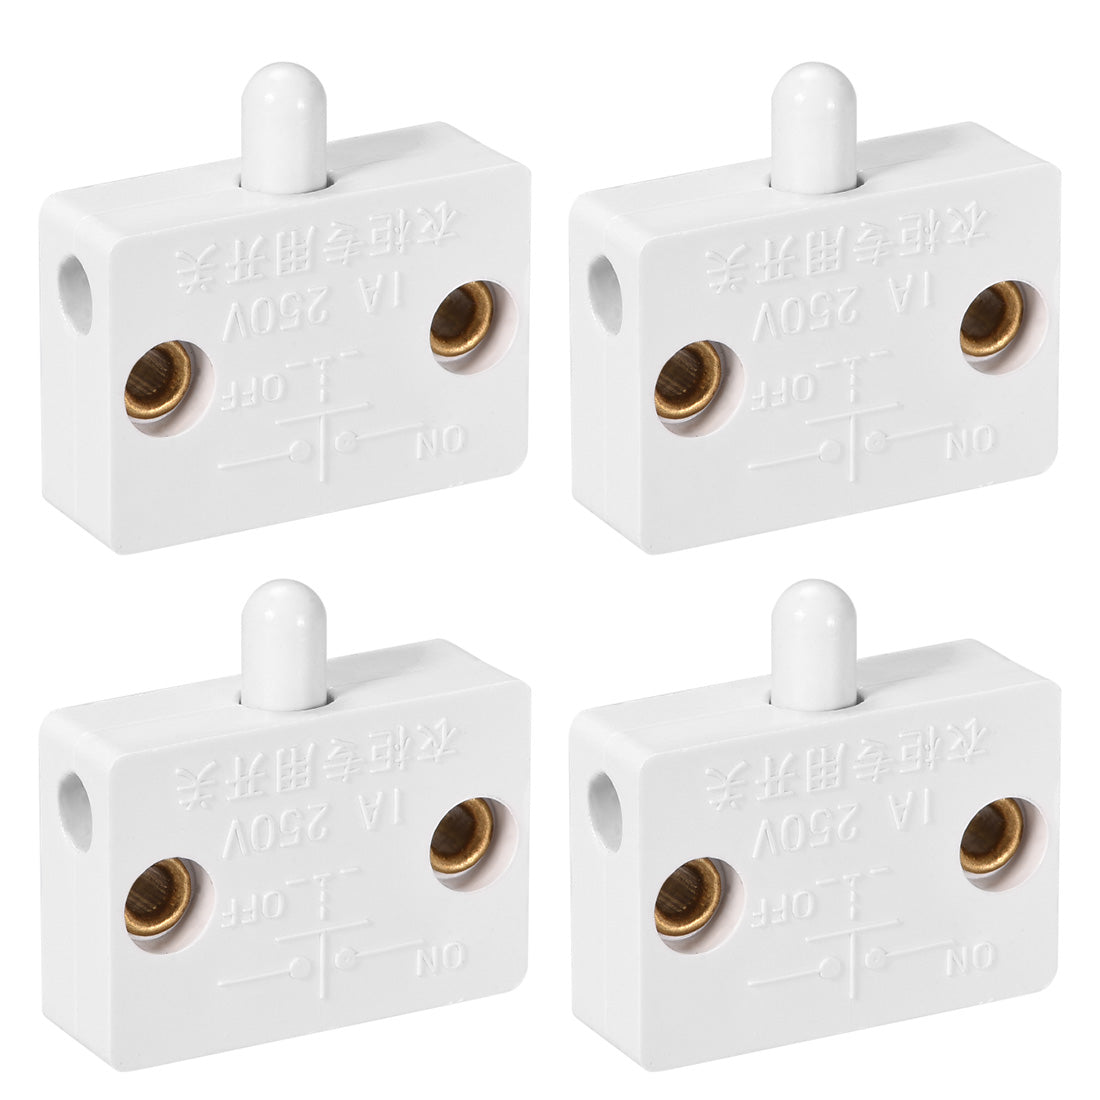 uxcell Uxcell Wardrobe Door Light Switch Momentary Cabinet Closet Switch Normally Closed 110-250V 1A White 4 Pcs